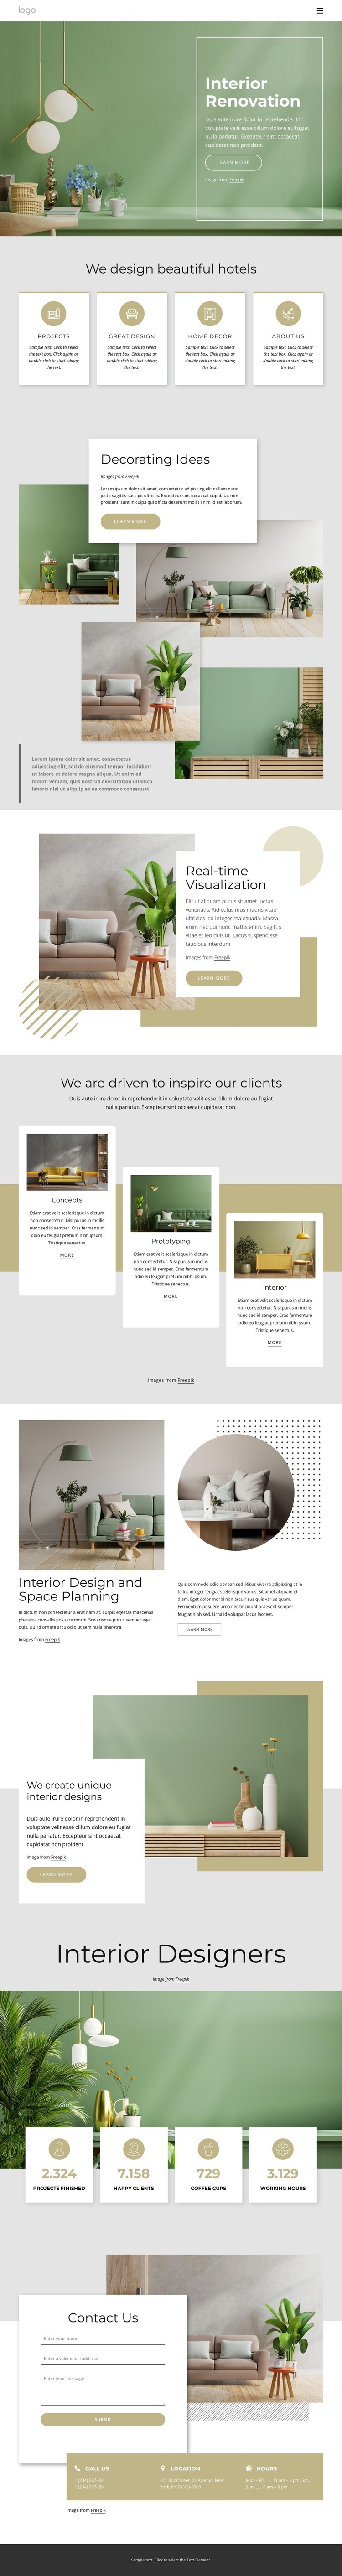 Architecture and interior design agency Webflow Template Alternative